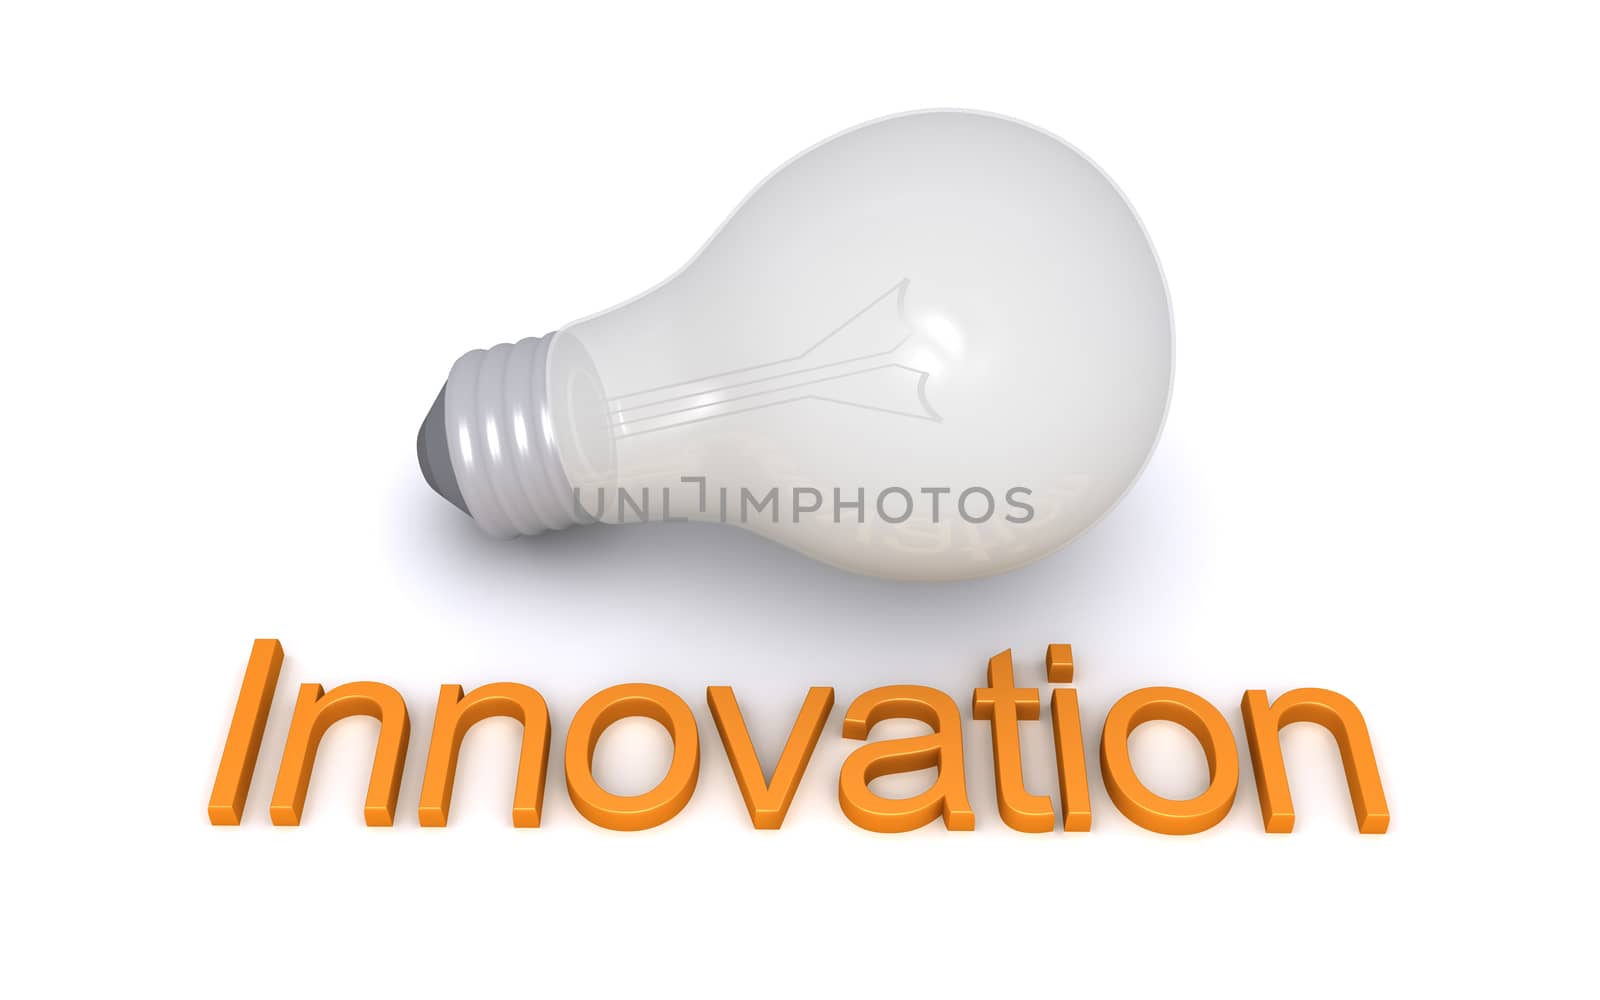 Light bulb and Innovation word by 6kor3dos